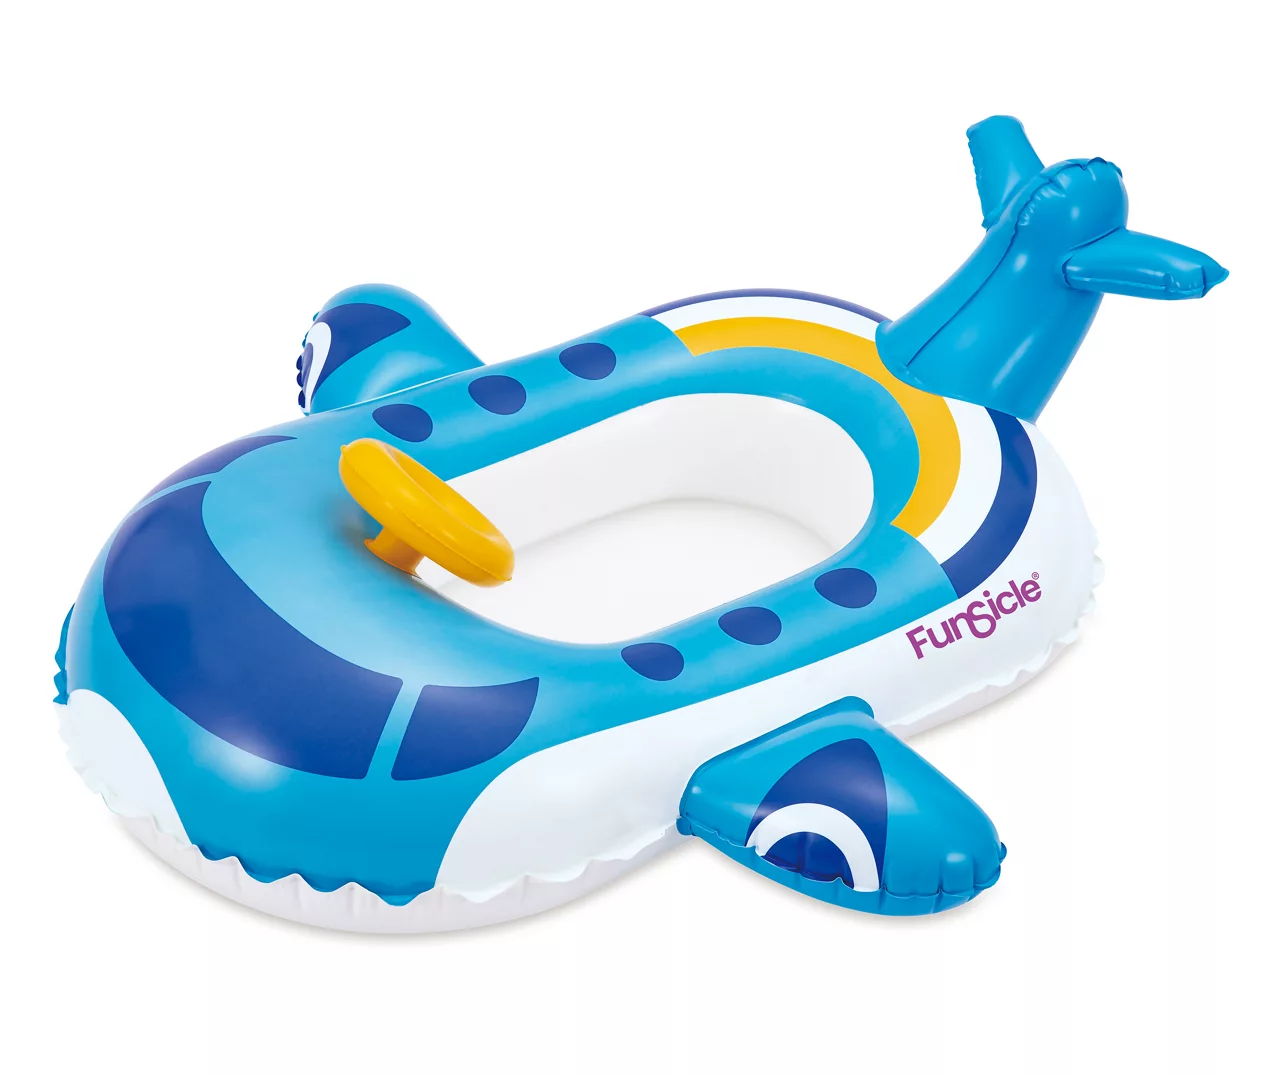 NEW Kids Inflatable Blue Jet Airplane Pool Float 37x33x12 in. bucket sea... - $10.95